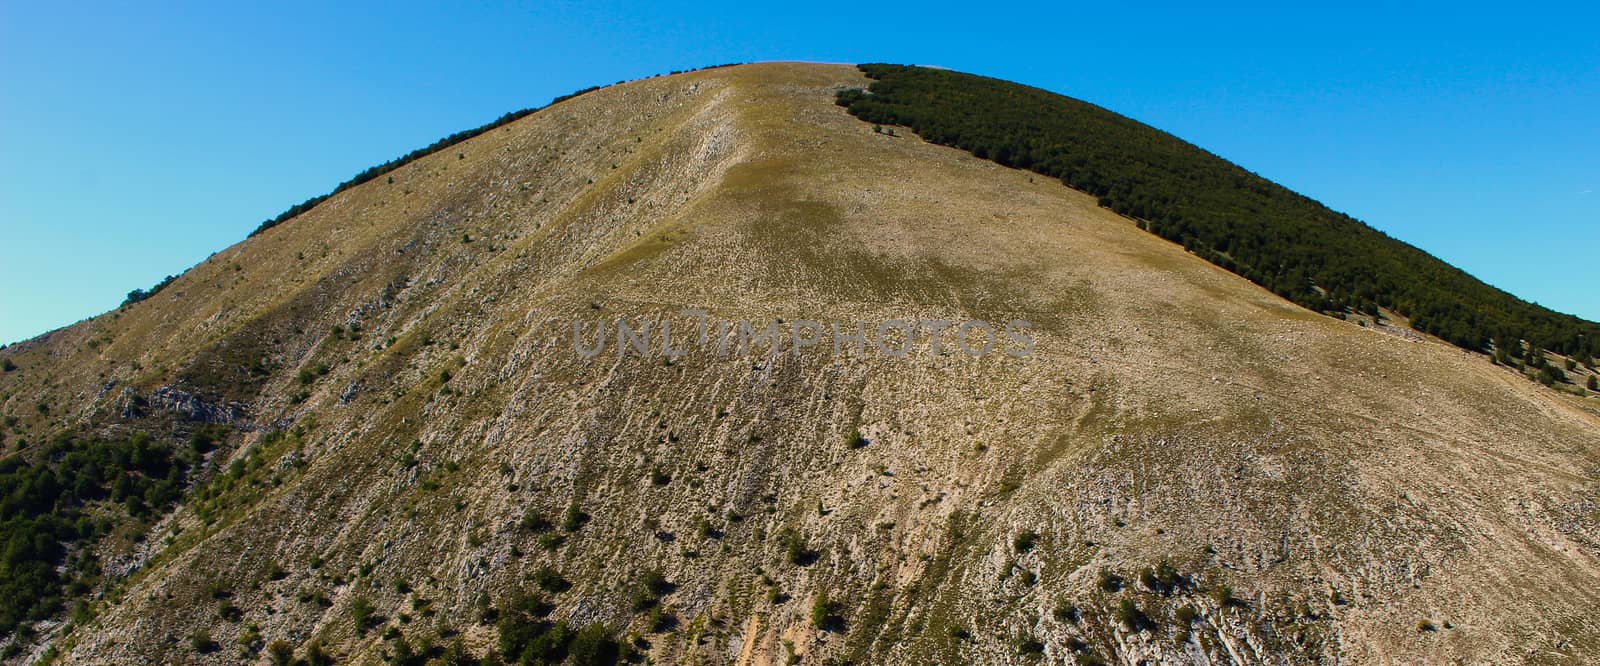 Banner of a huge hill above the old Bosnian village of Lukomir, which is quite devoid of vegetation due to soil erosion. by mahirrov